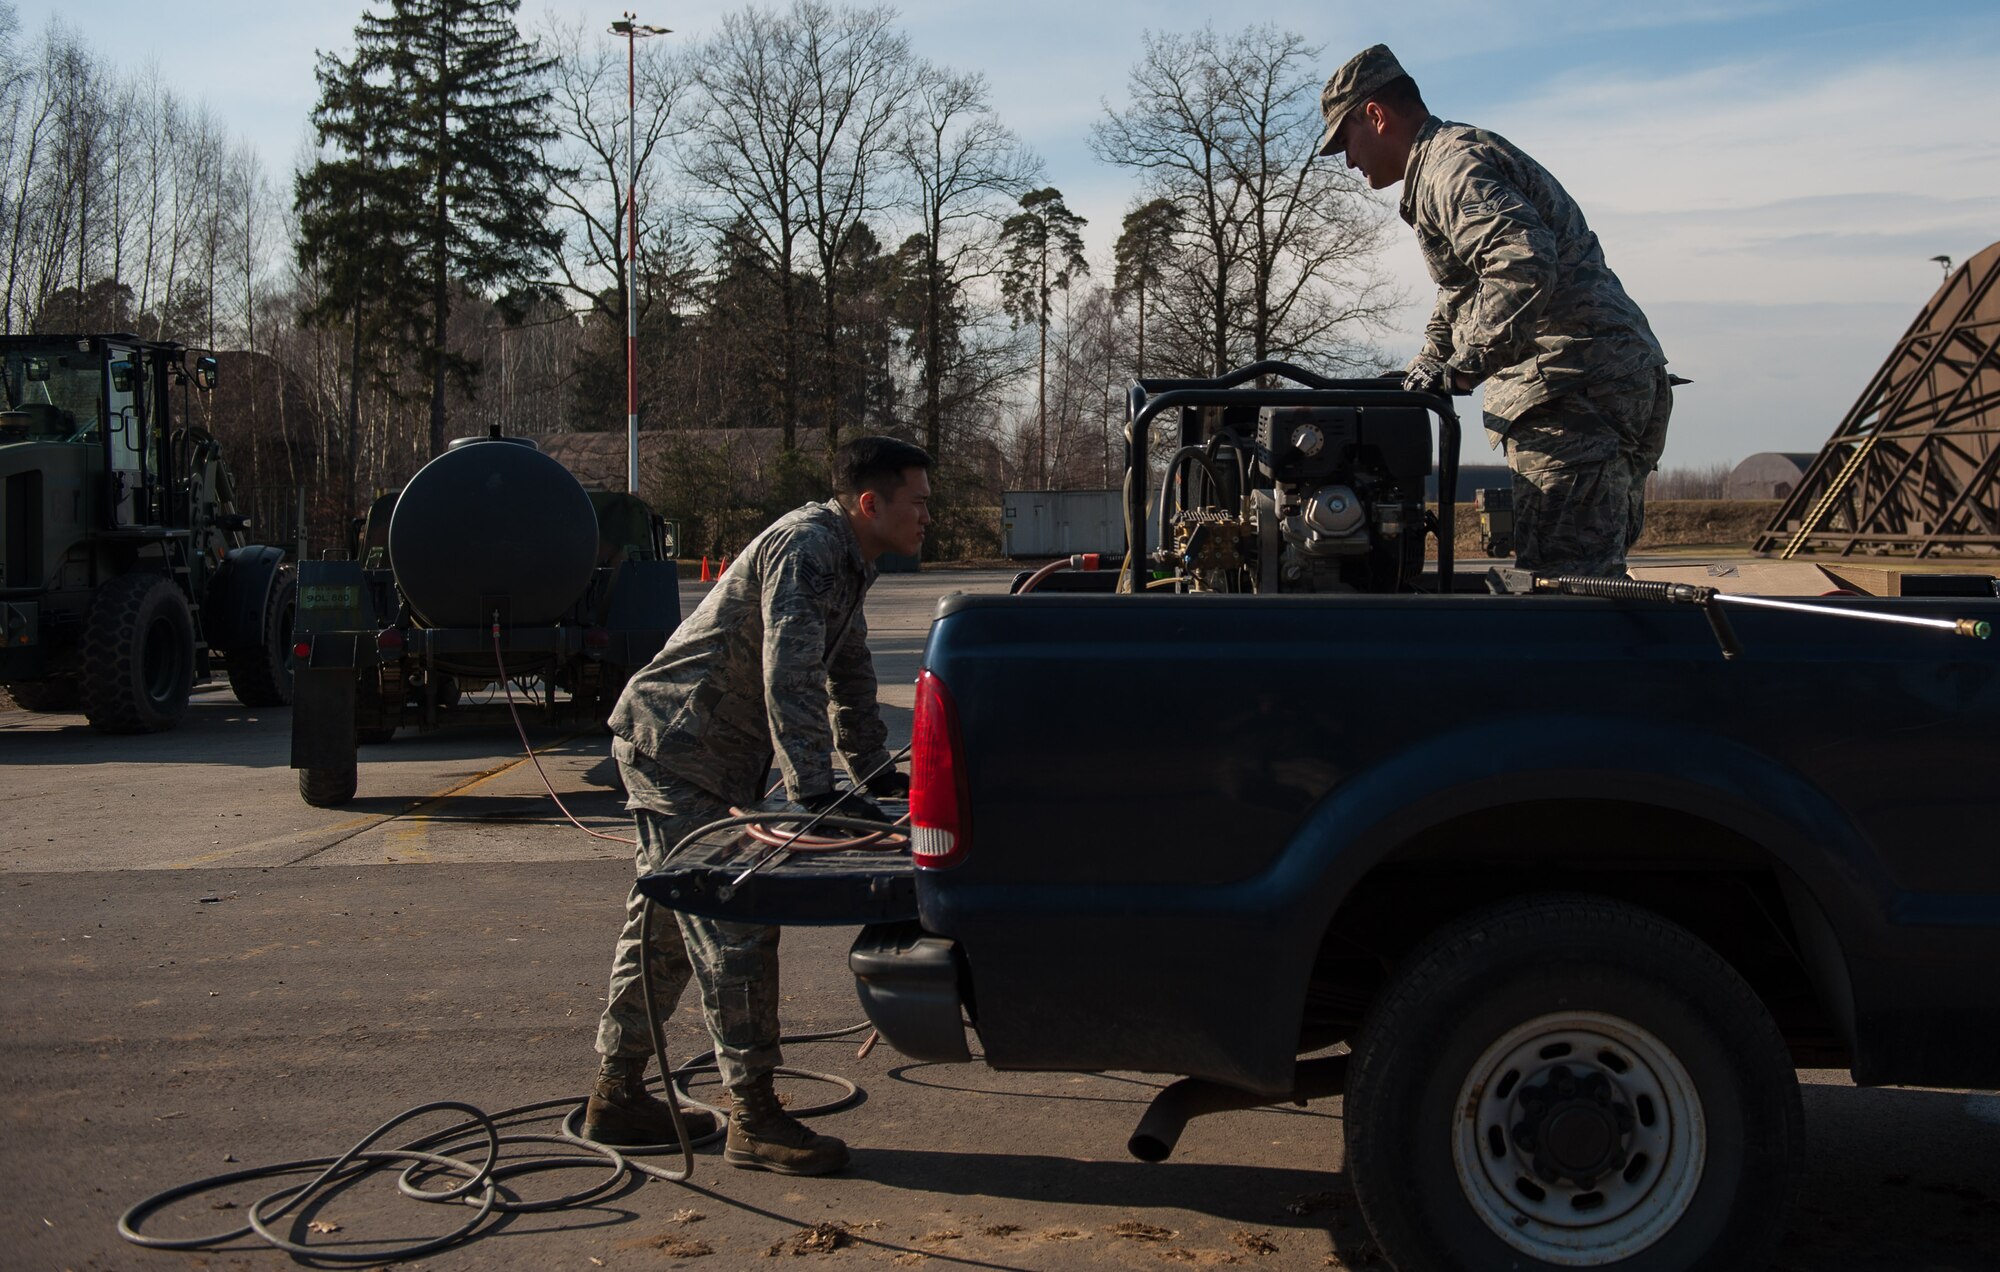 Staff Sgt. Ju Ho Park, 1st Combat Communications Squadron electrical power production craftsman, and Senior Airman Christopher Pakusch, 1 CBCS electrical power production journeyman, lower a water power pressure machine during a mock deployment exercise on Ramstien Air Base, Germany, Feb. 16, 2017. Airmen from 1 CBCS use mock-deployment exercises to enhance job skills and maintain equipment to be prepared for deployments at any given time. (U.S. Air Force photo by Senior Airman Lane T. Plummer)